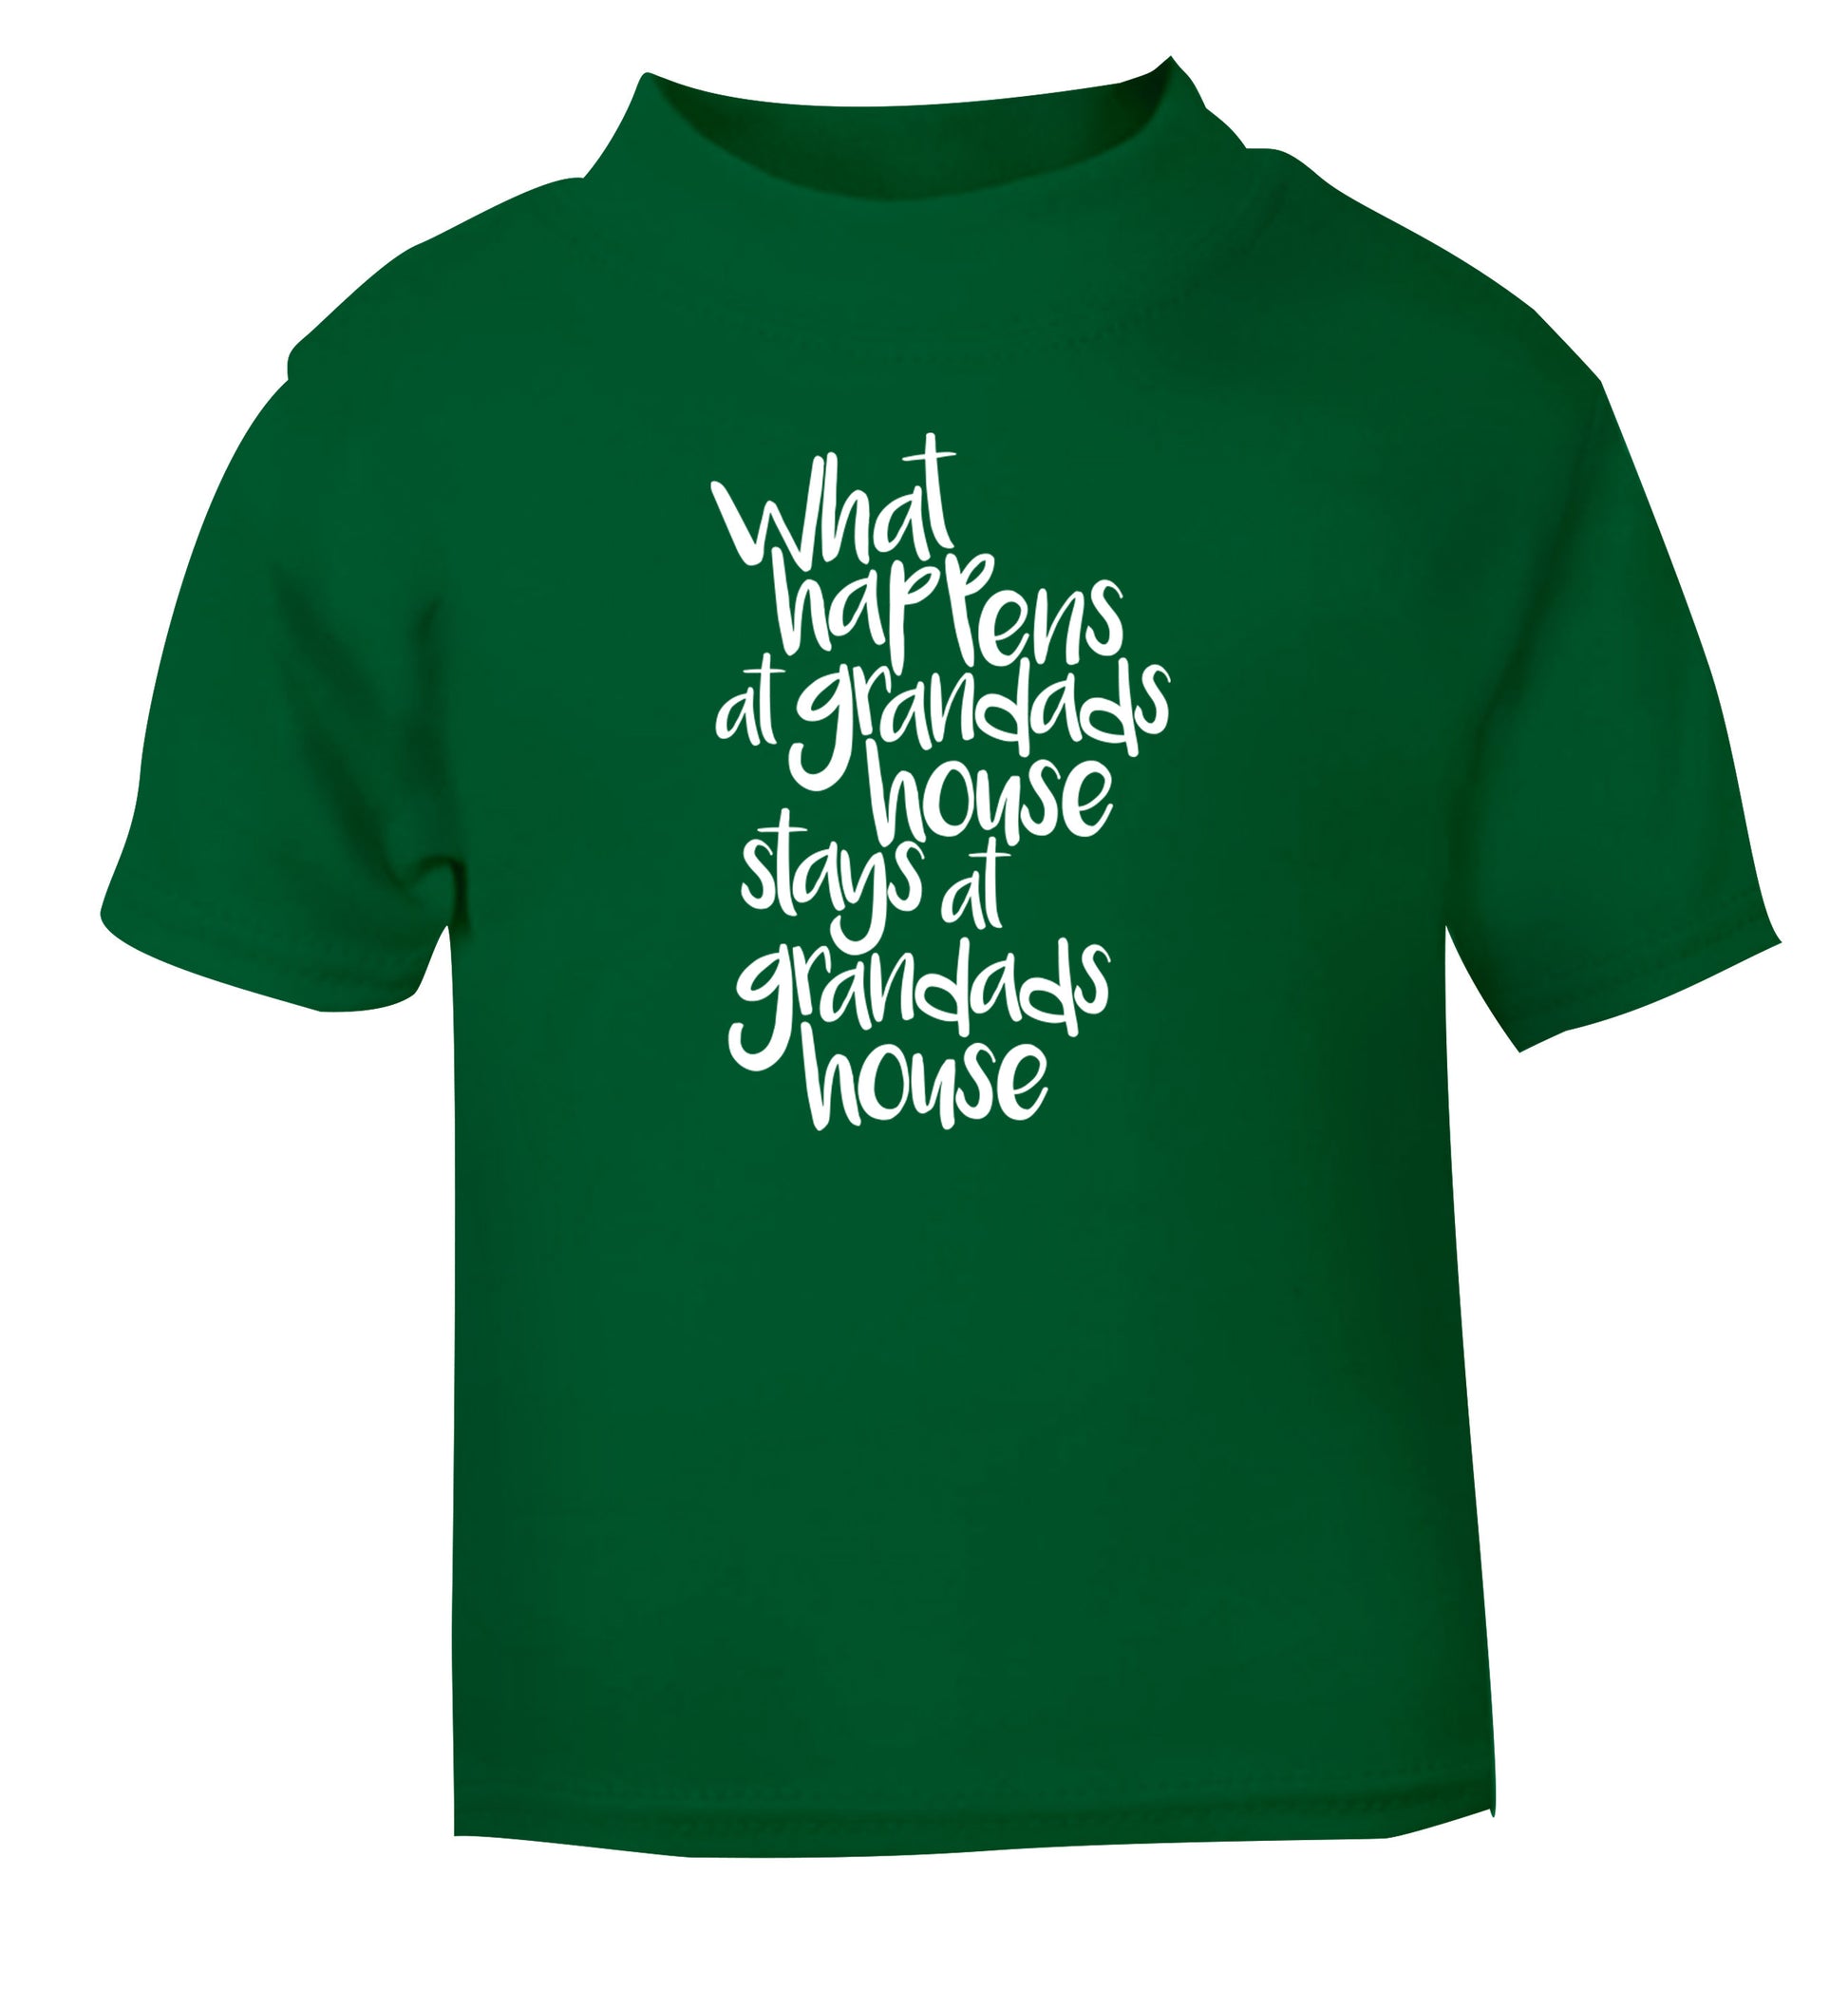 What happens at grandads house stays at grandads house green Baby Toddler Tshirt 2 Years